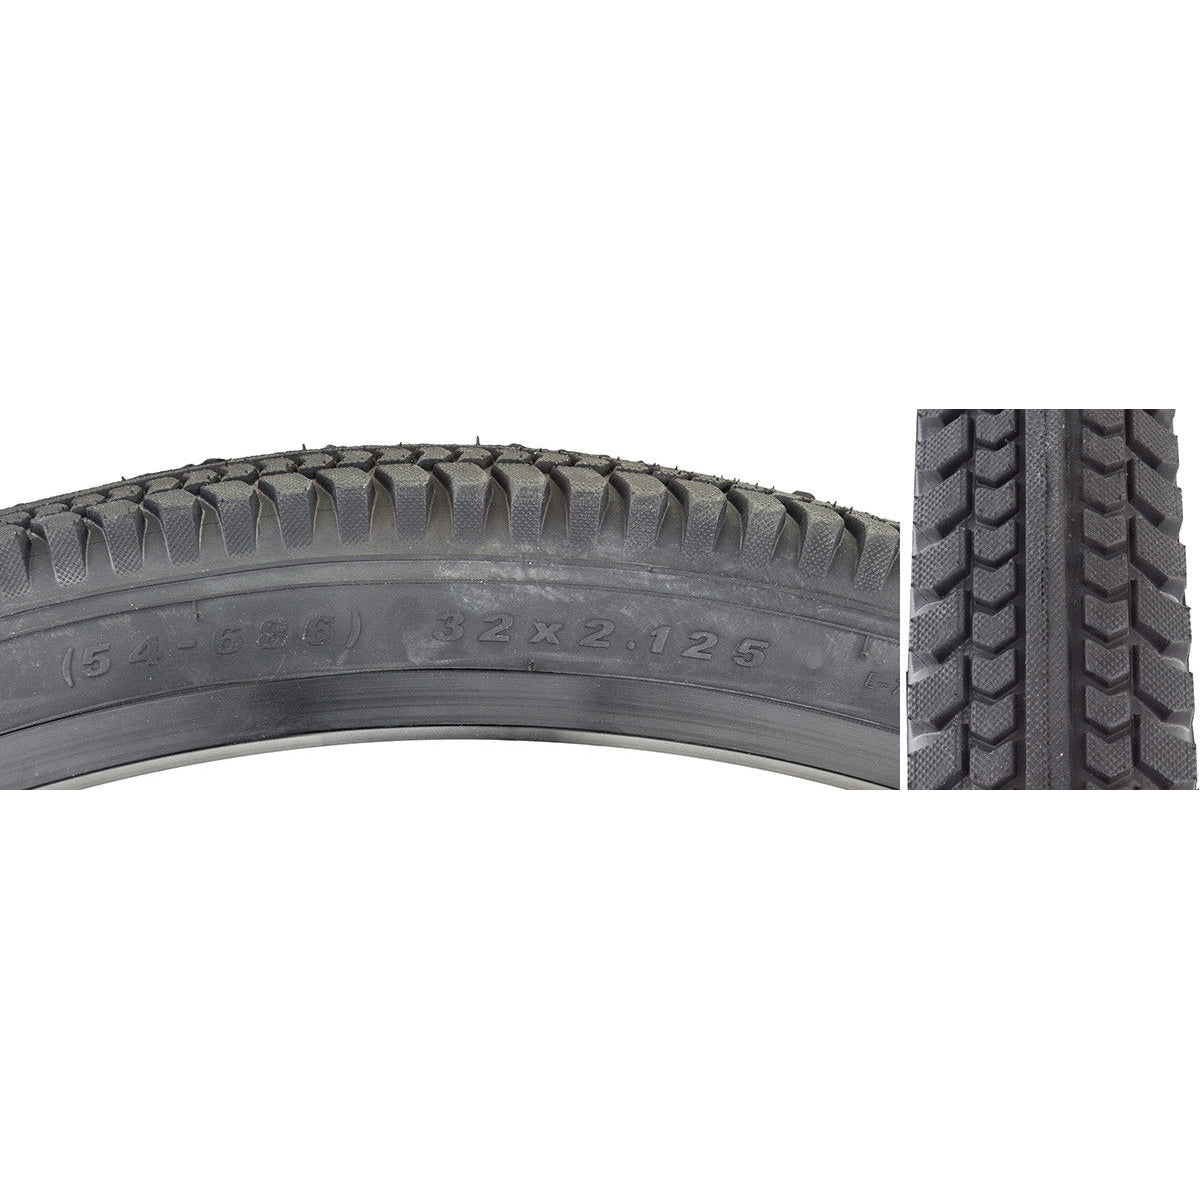 32x2.125 Bicycle Tire - 32" for Kent Genesis - All Black